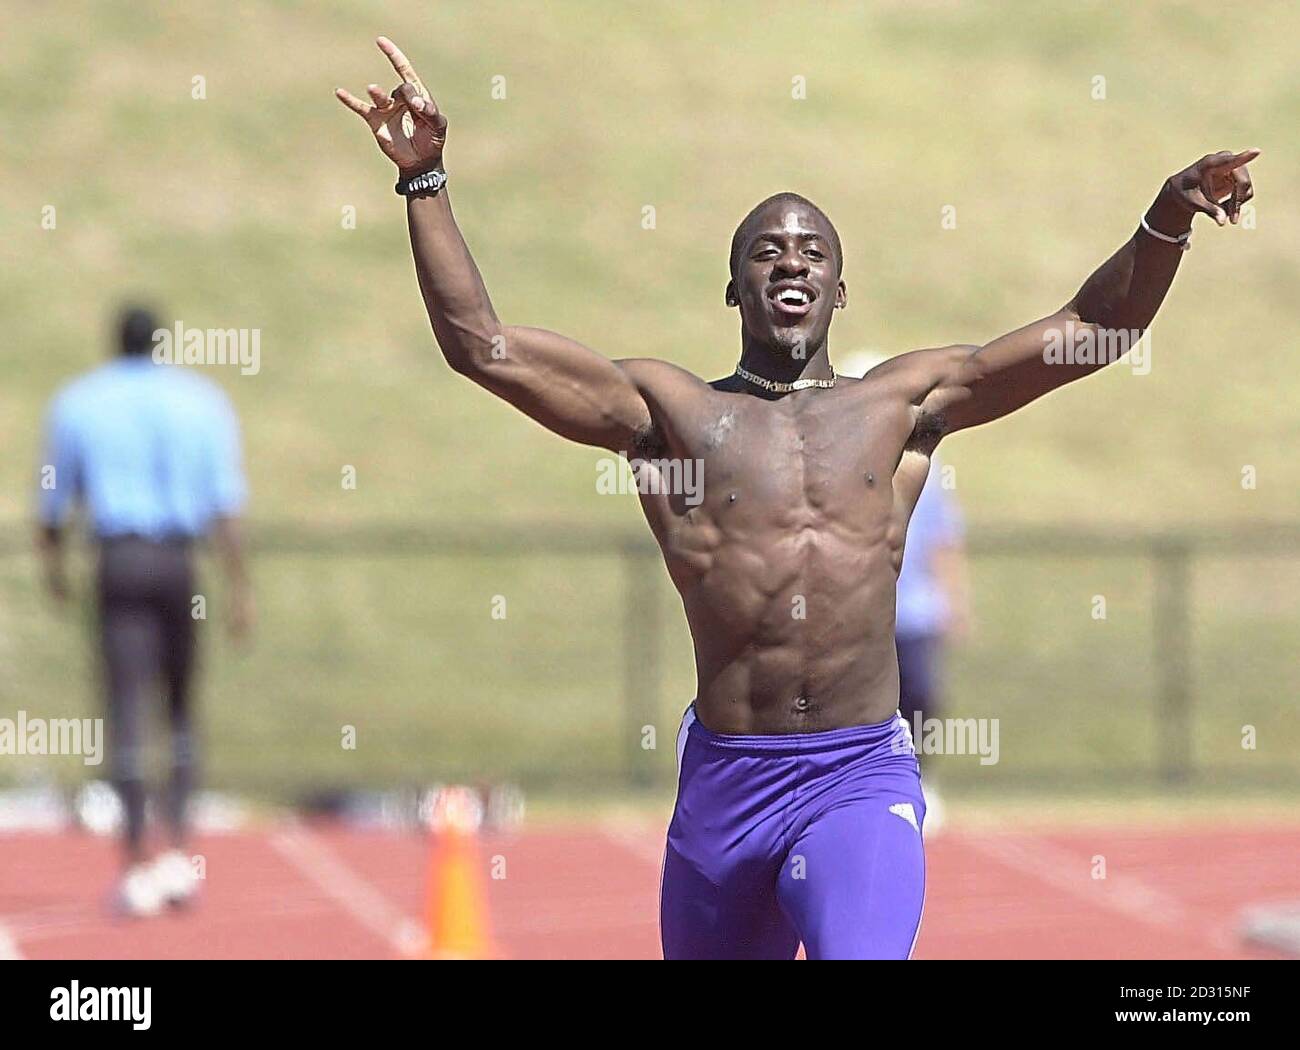 Dwain Chambers celebrates victory over Linford Christie (walking  back) after Christie pulled up in a fun race, at the Great Britain Athletics Training Camp on the Gold Coast of Australia. Stock Photo